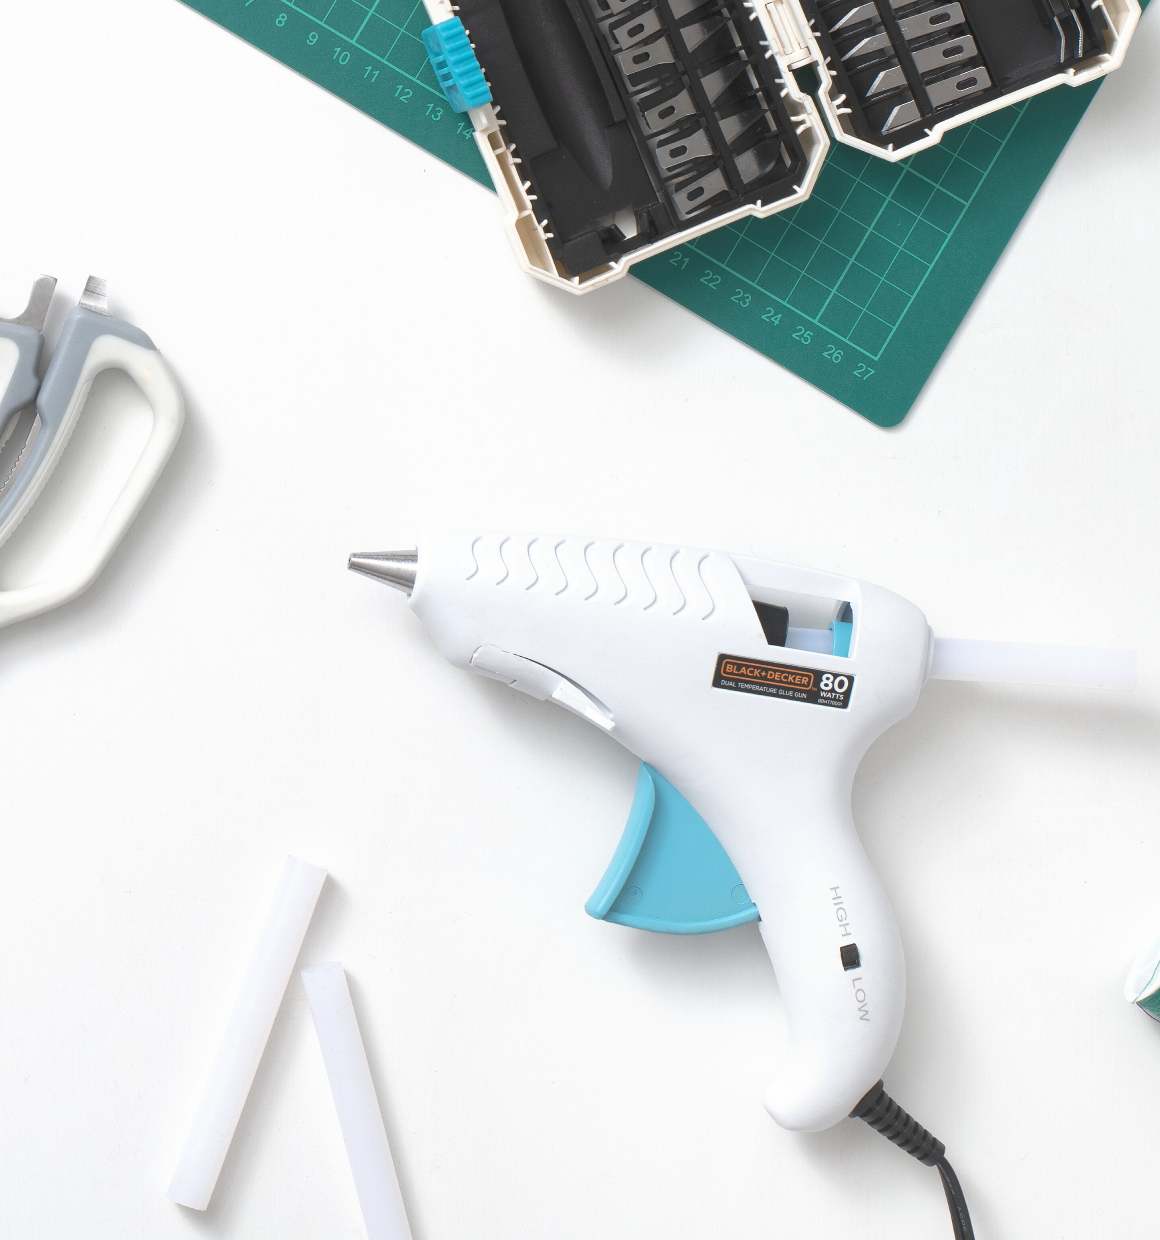 https://cld.accentuate.io/7851517575389/1665068096438/RESIZE_1160x1240_BD_Manual_Crafting_G1_CROP-TO-FLAT-LAY-OF-GLUE-GUN.png?v=1665068096438&options=